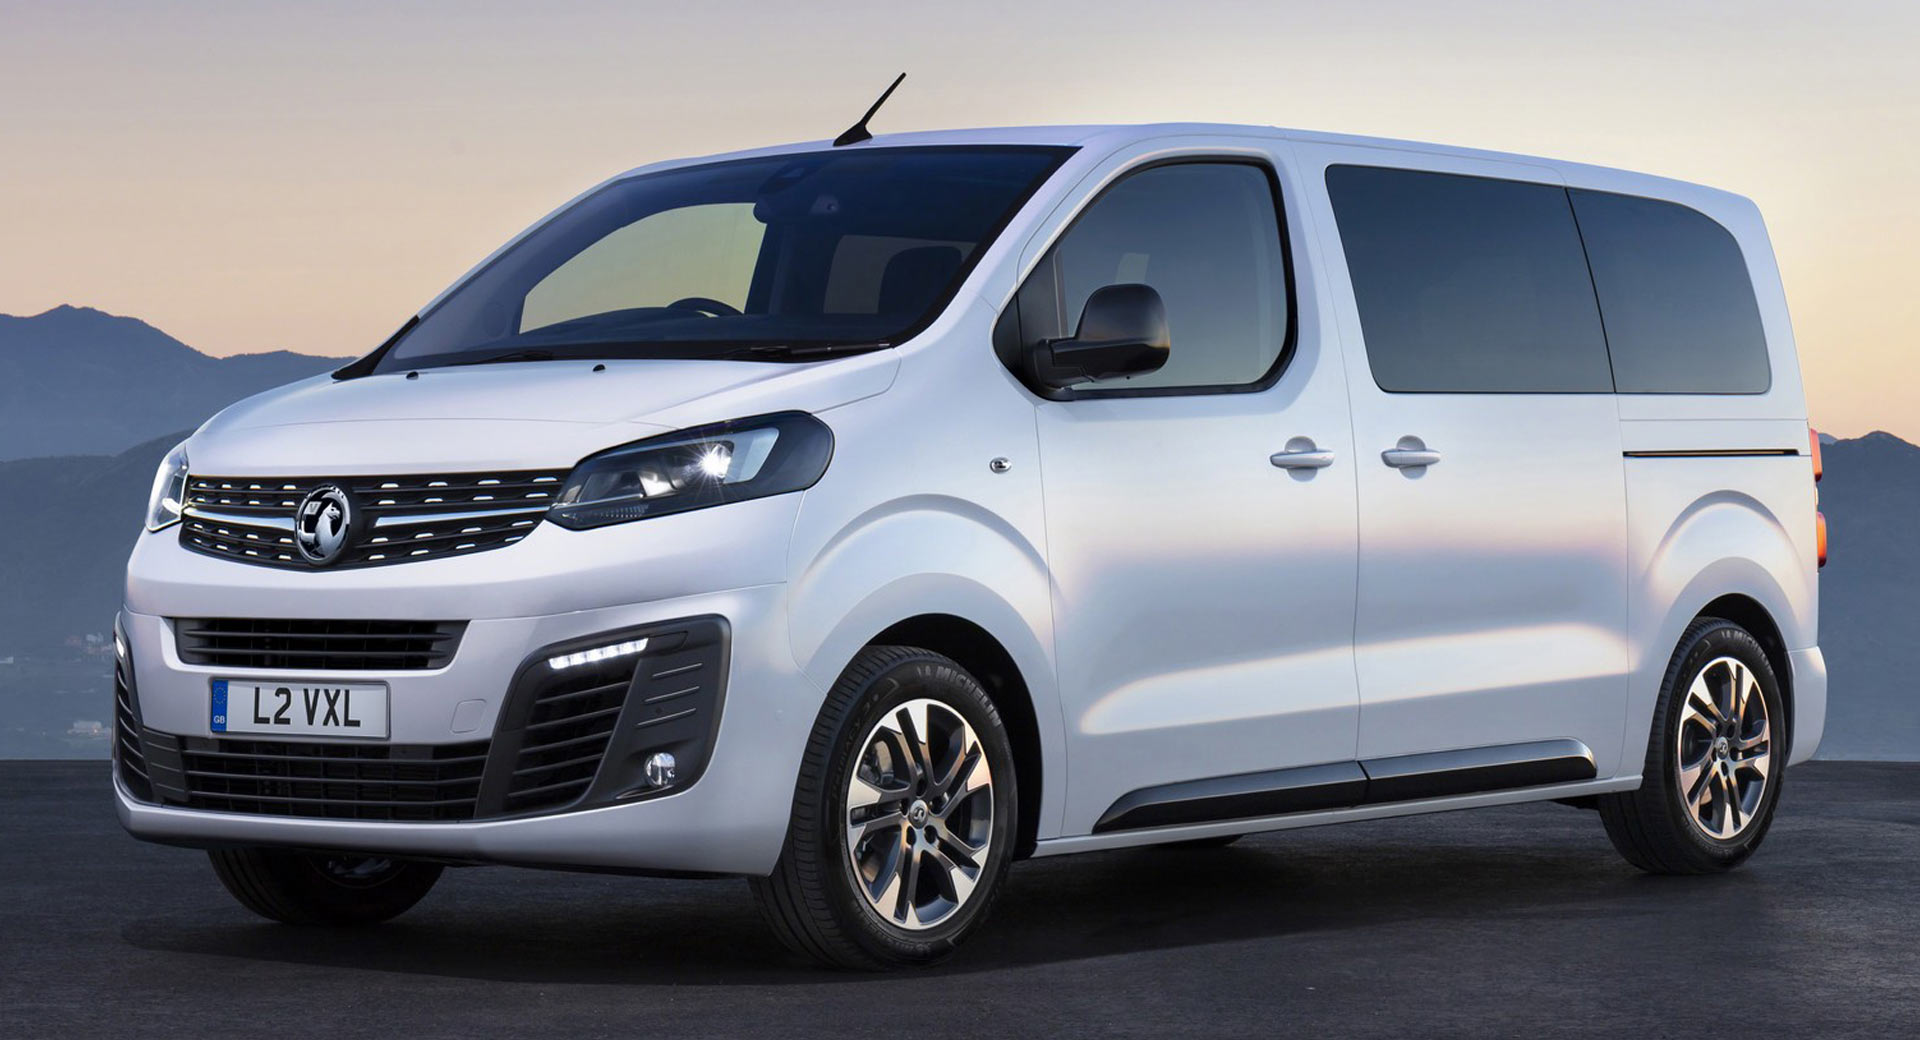 New Opel Vivaro Life Is A 9-Seat Van With An Available Electric Powertrain  | Carscoops